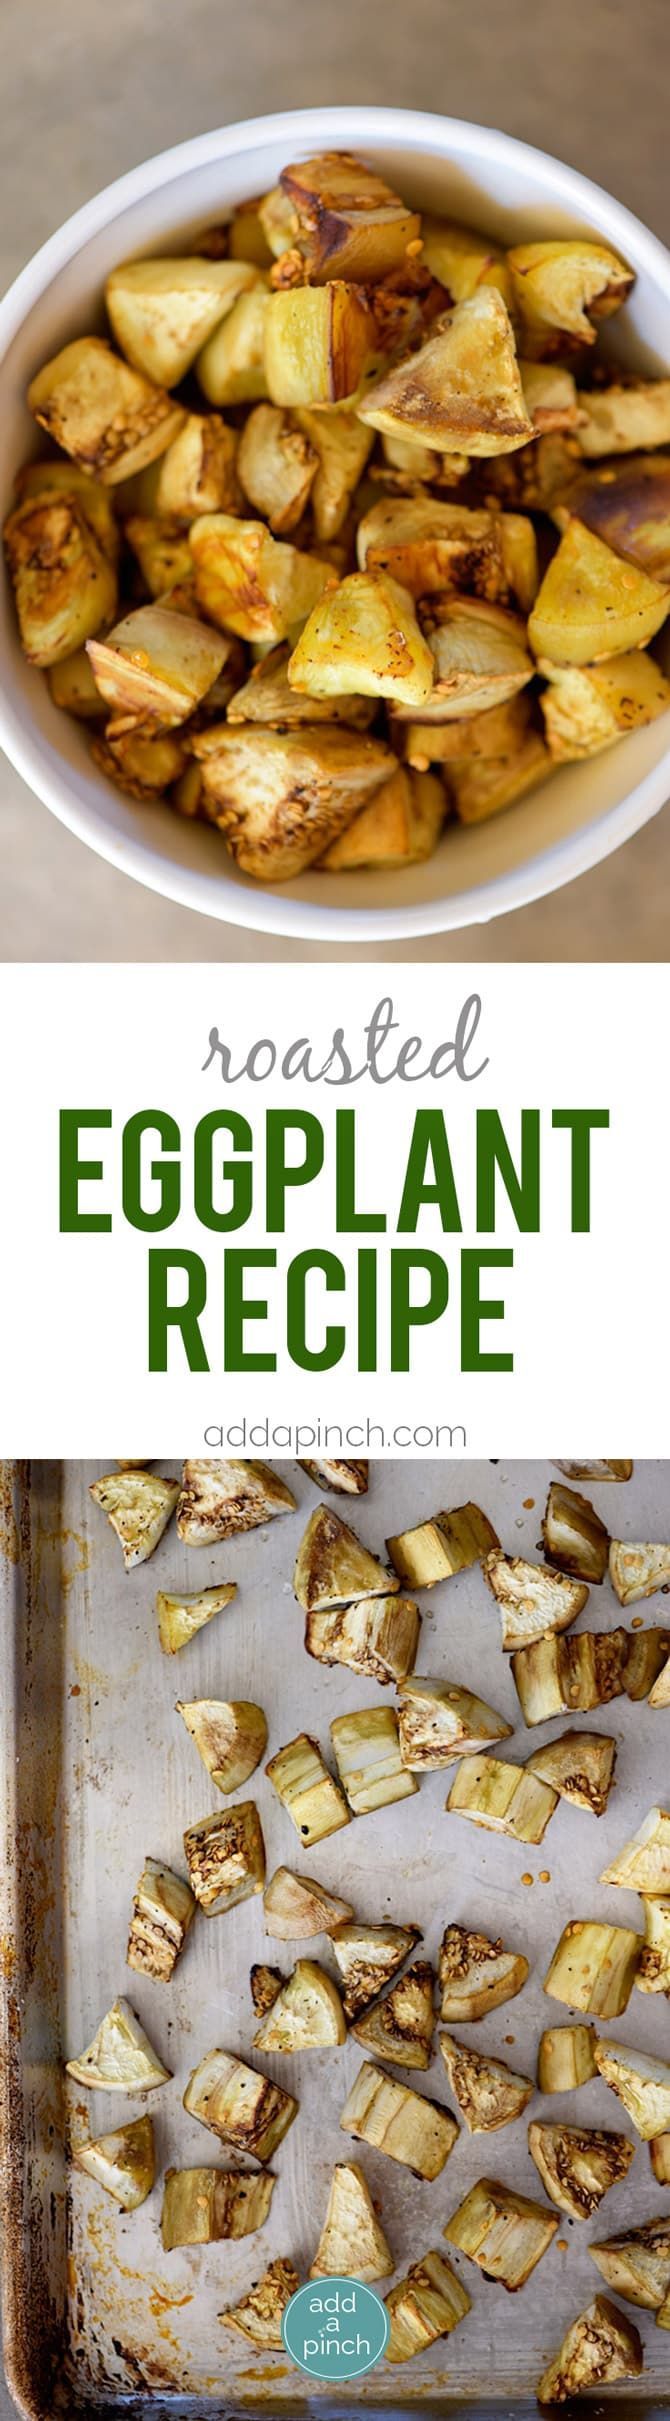 Roasted Eggplant Recipe – Roasted Eggplant makes an easy and delicious dish on its own or to use in so many other recipes! //